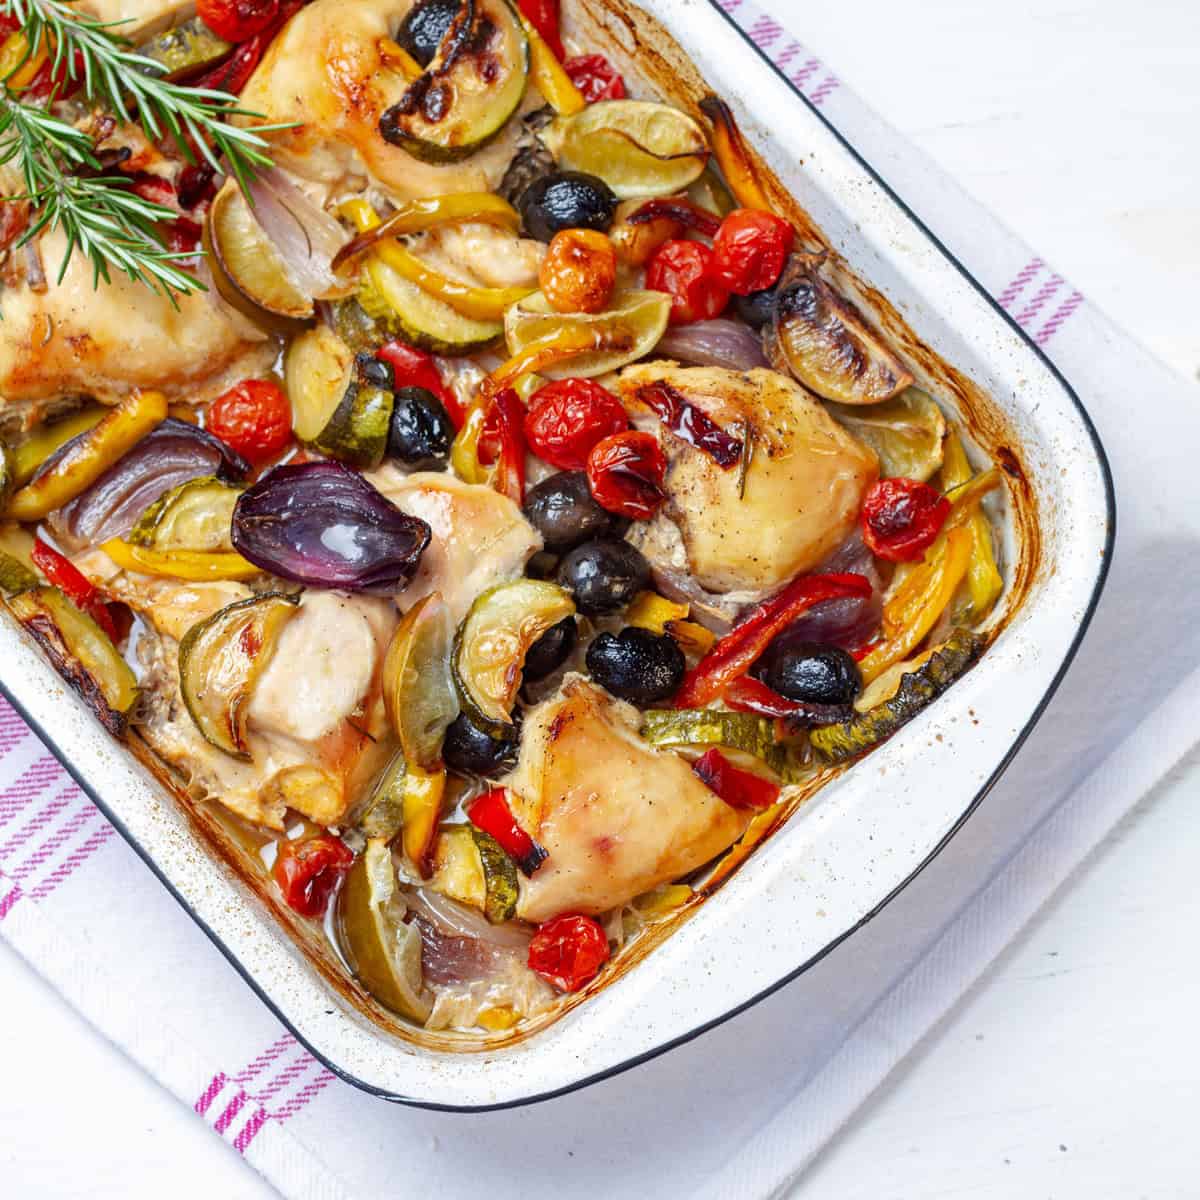 Simple yet delicious—Greek Lemon Chicken with olives and colorful vegetables in a baking dish.